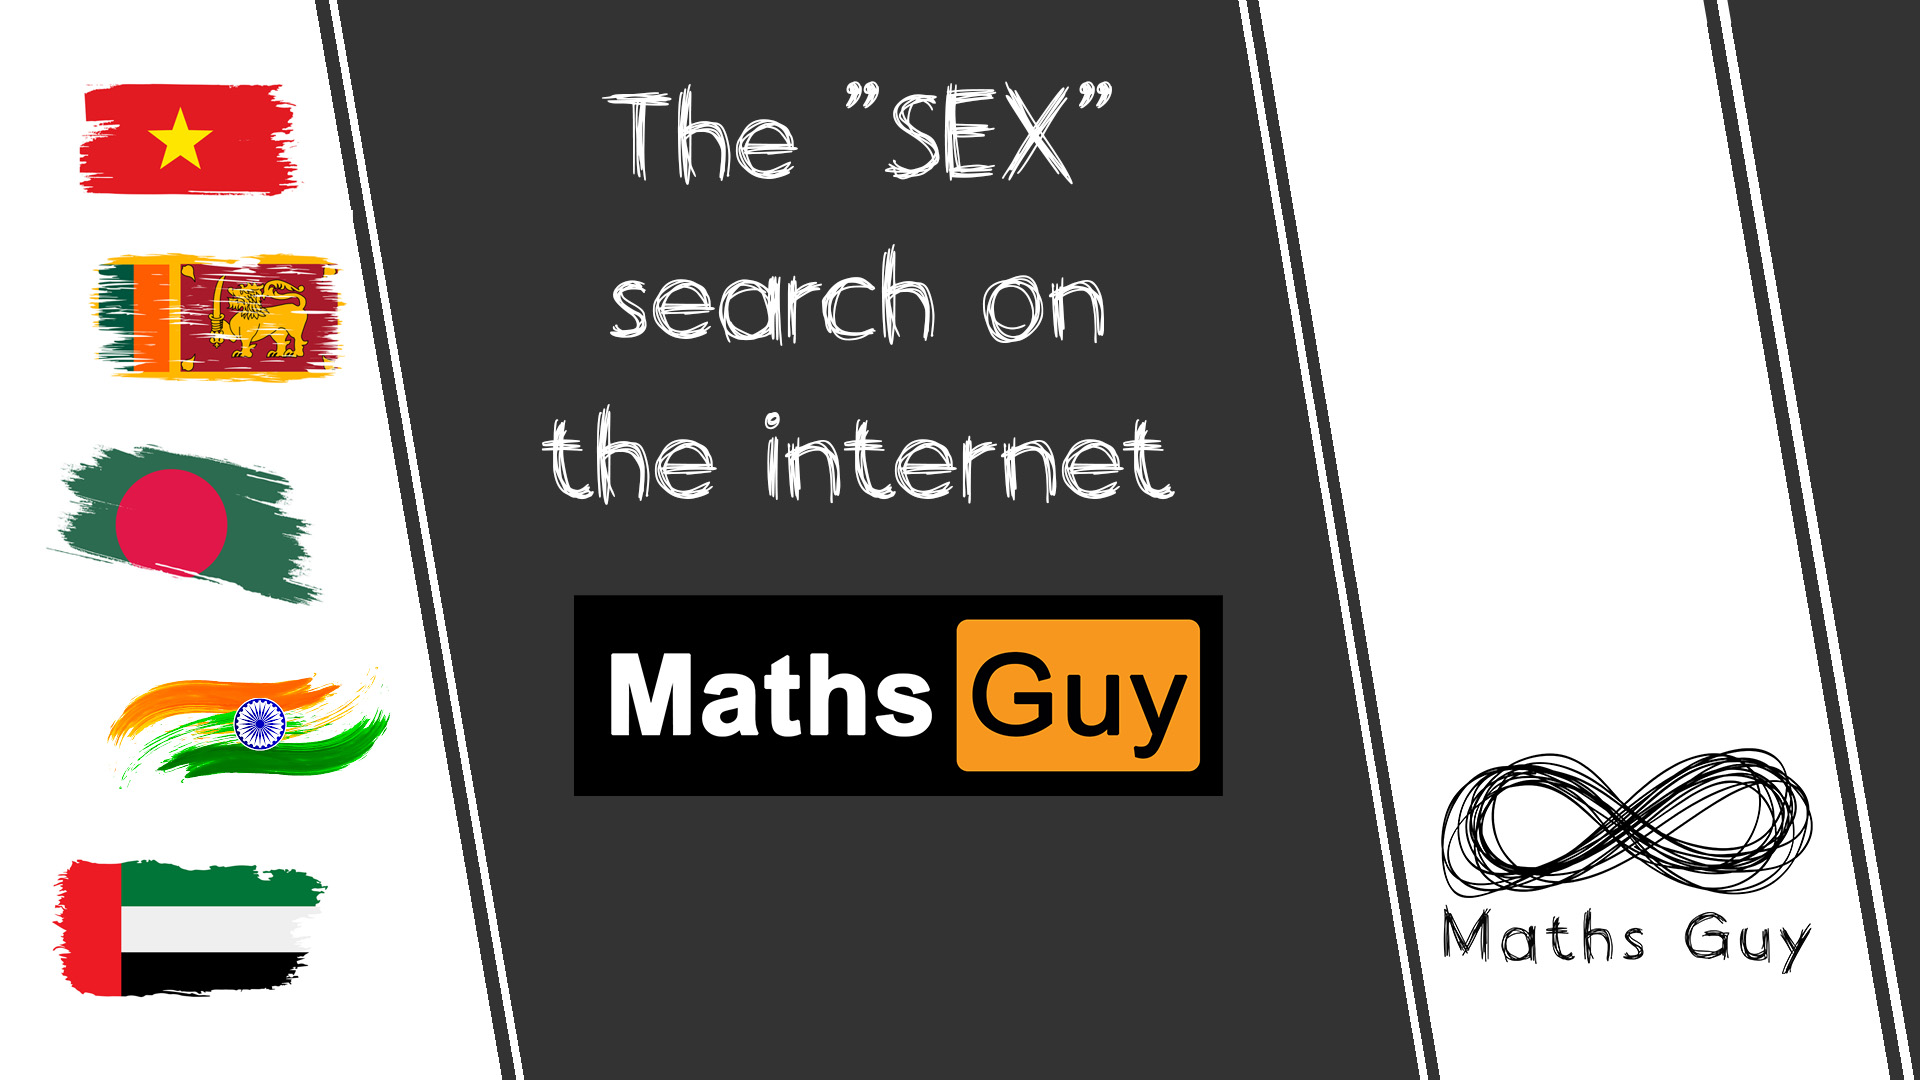 The-sex-search-on-the-internet-cover-maths-guy